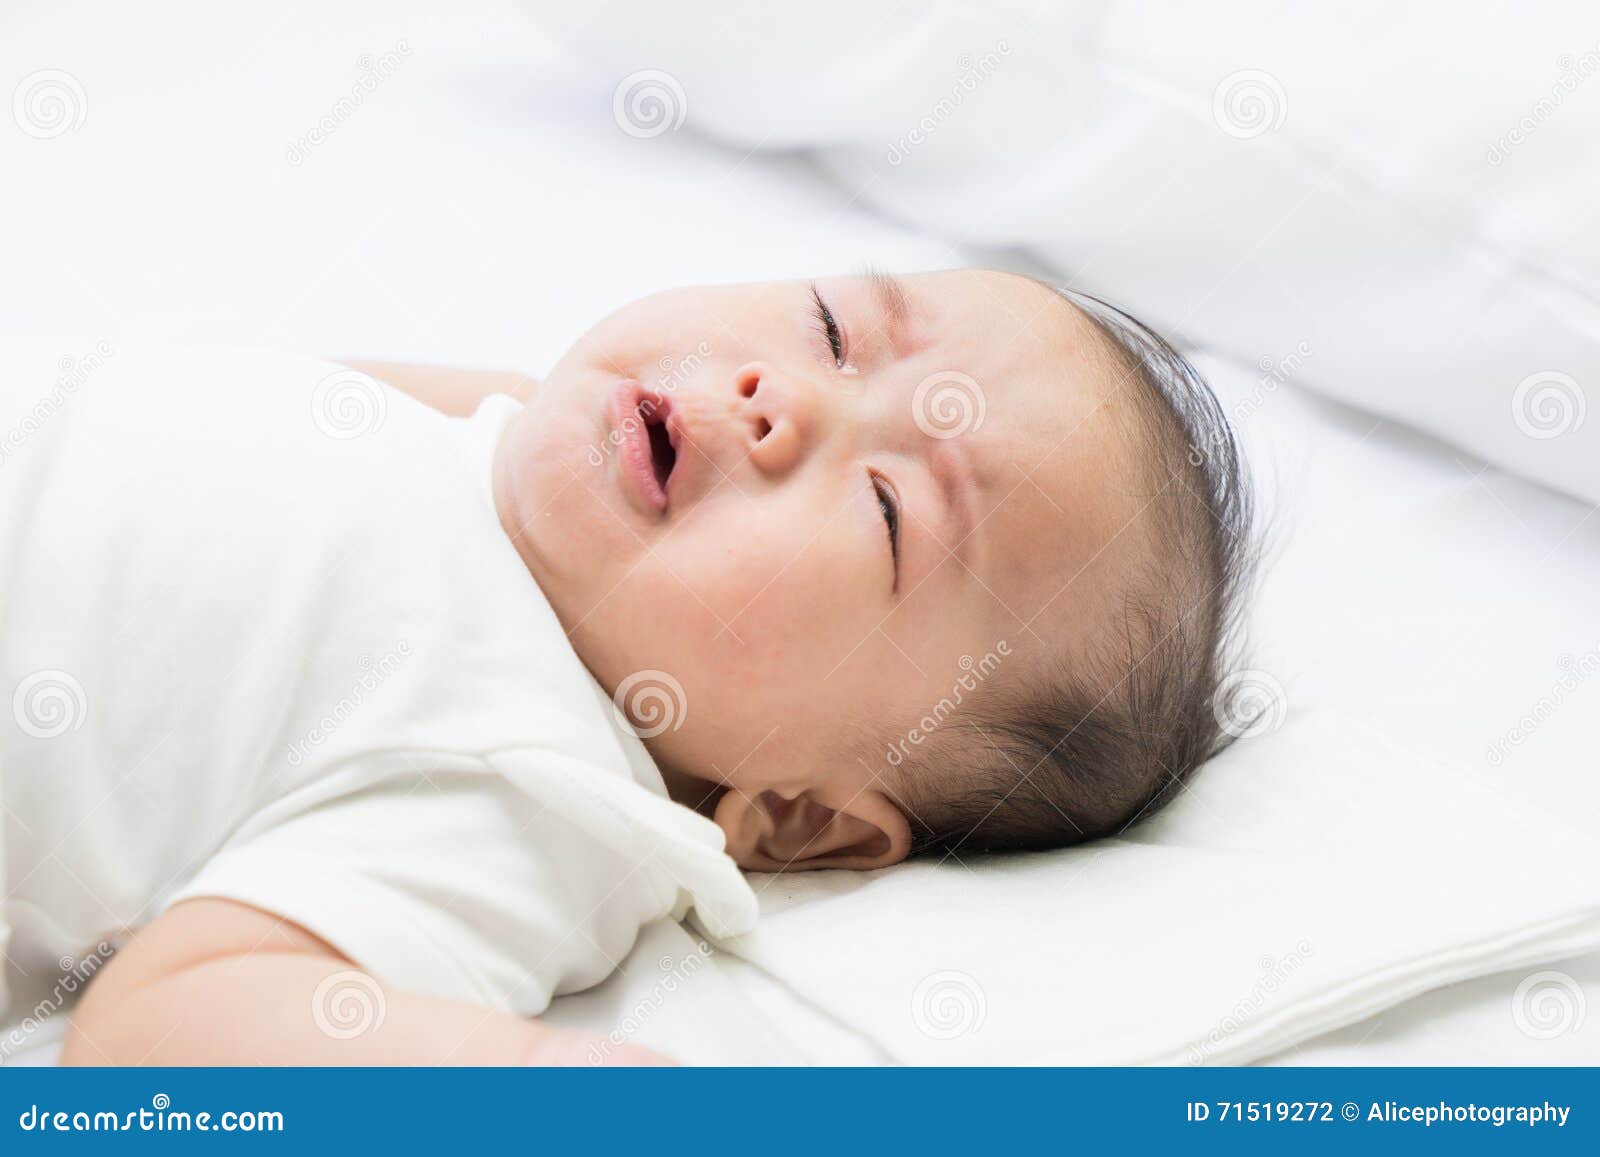 Background Of The Crying Asian Baby Stock Photos, Pictures 